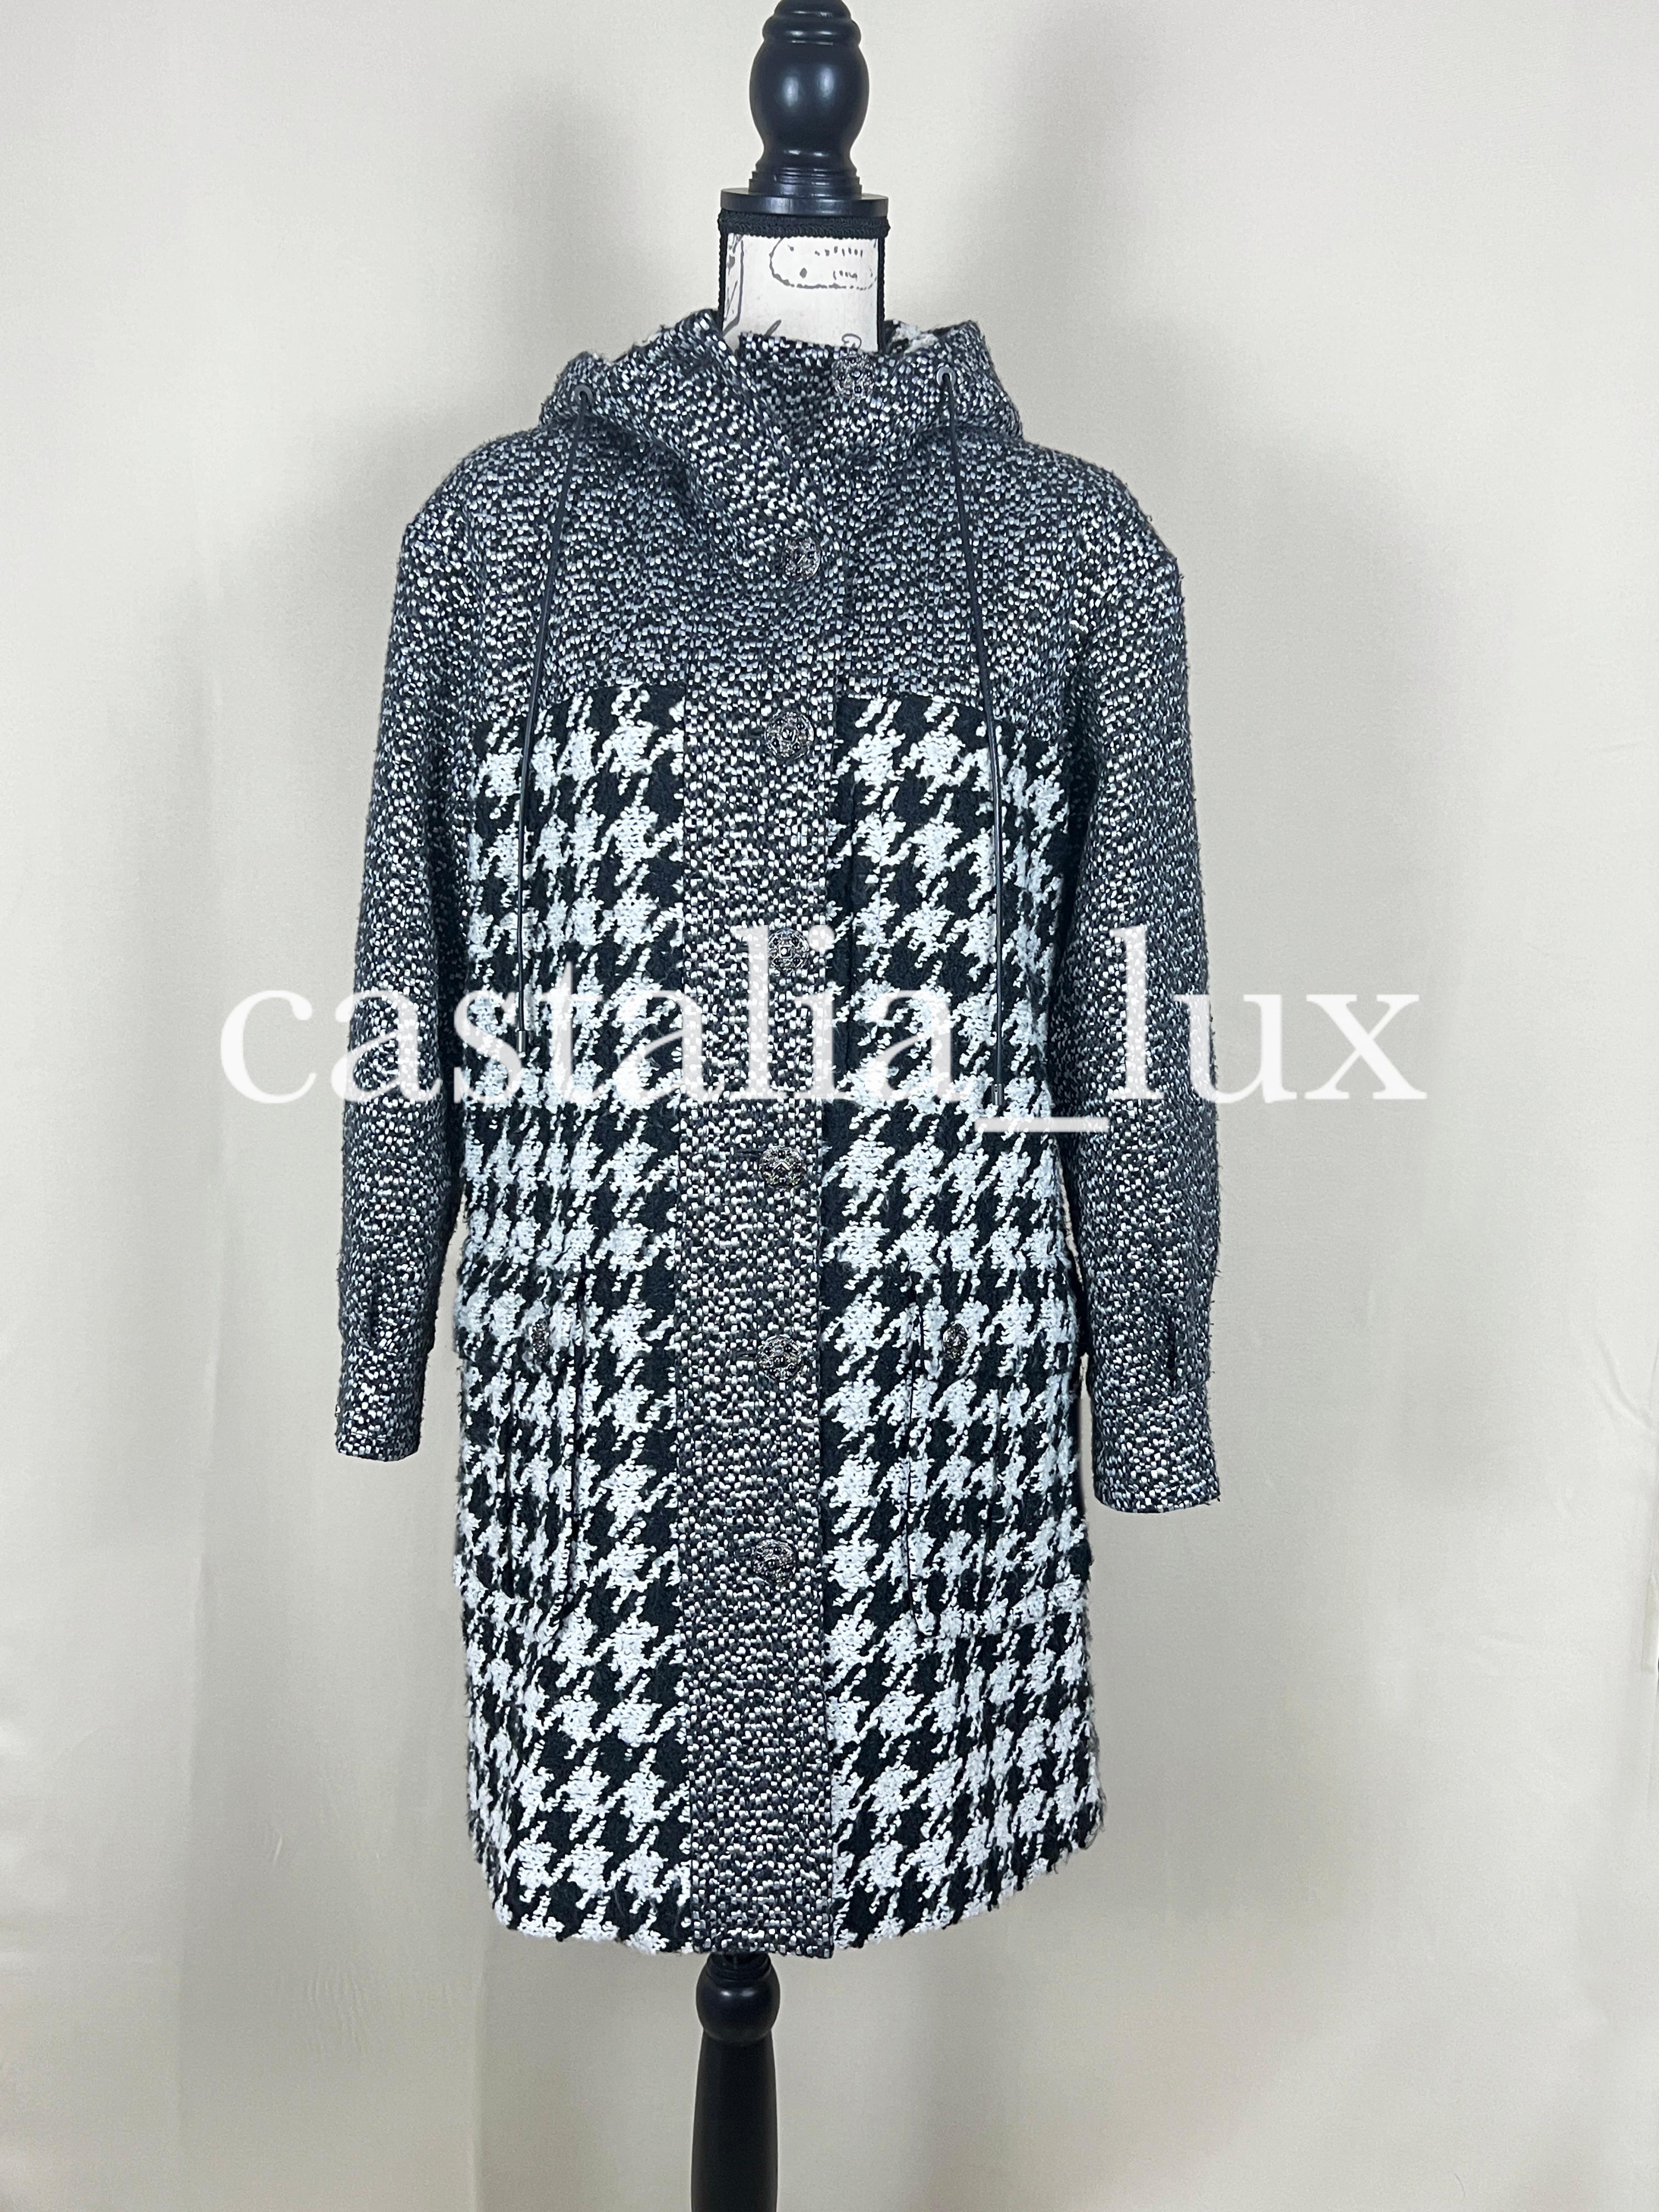 Chanel New CC Jewel Buttons Tweed Parka Coat For Sale 1